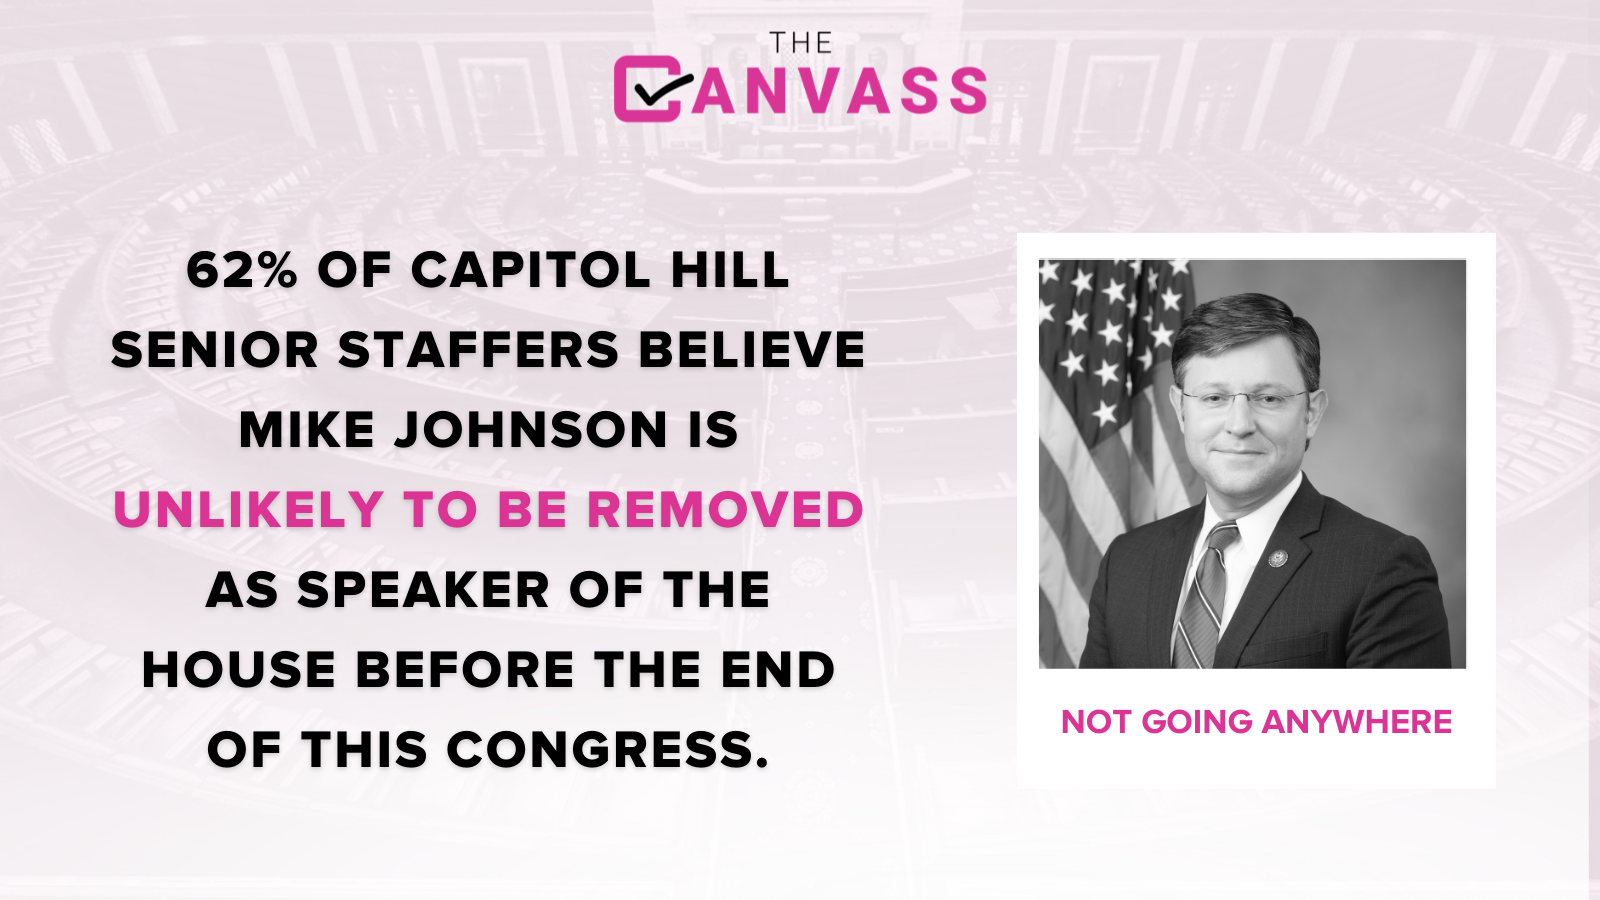 Hill aides say Johnson will last the rest of this Congress as speaker.